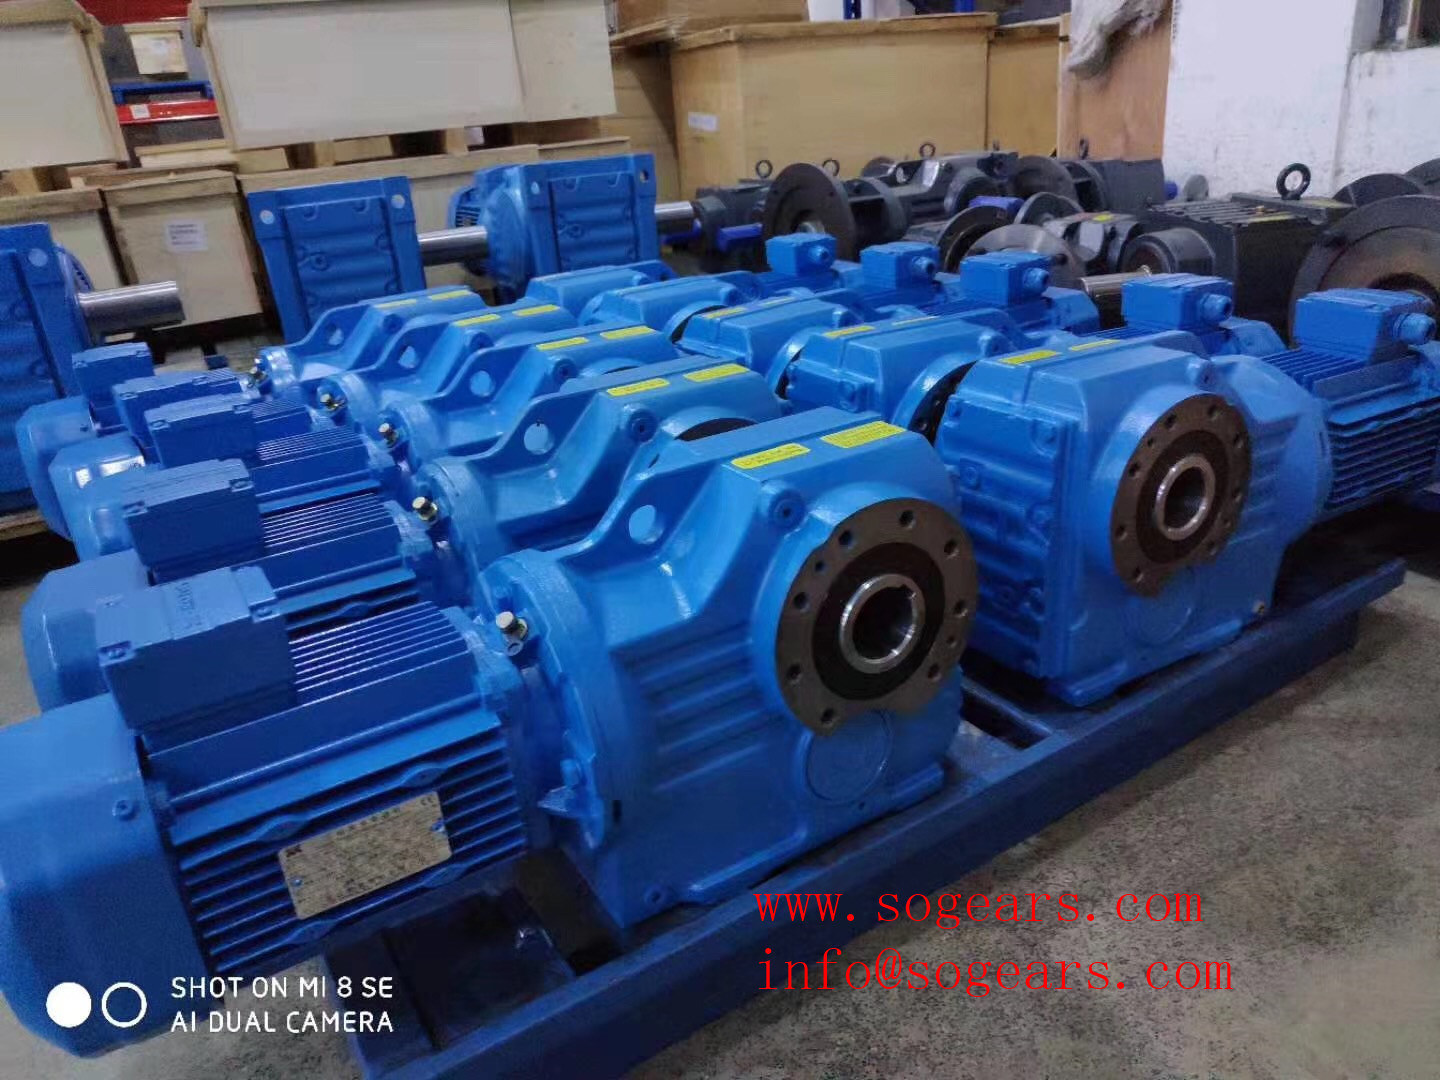 Electric motors dealers in China list